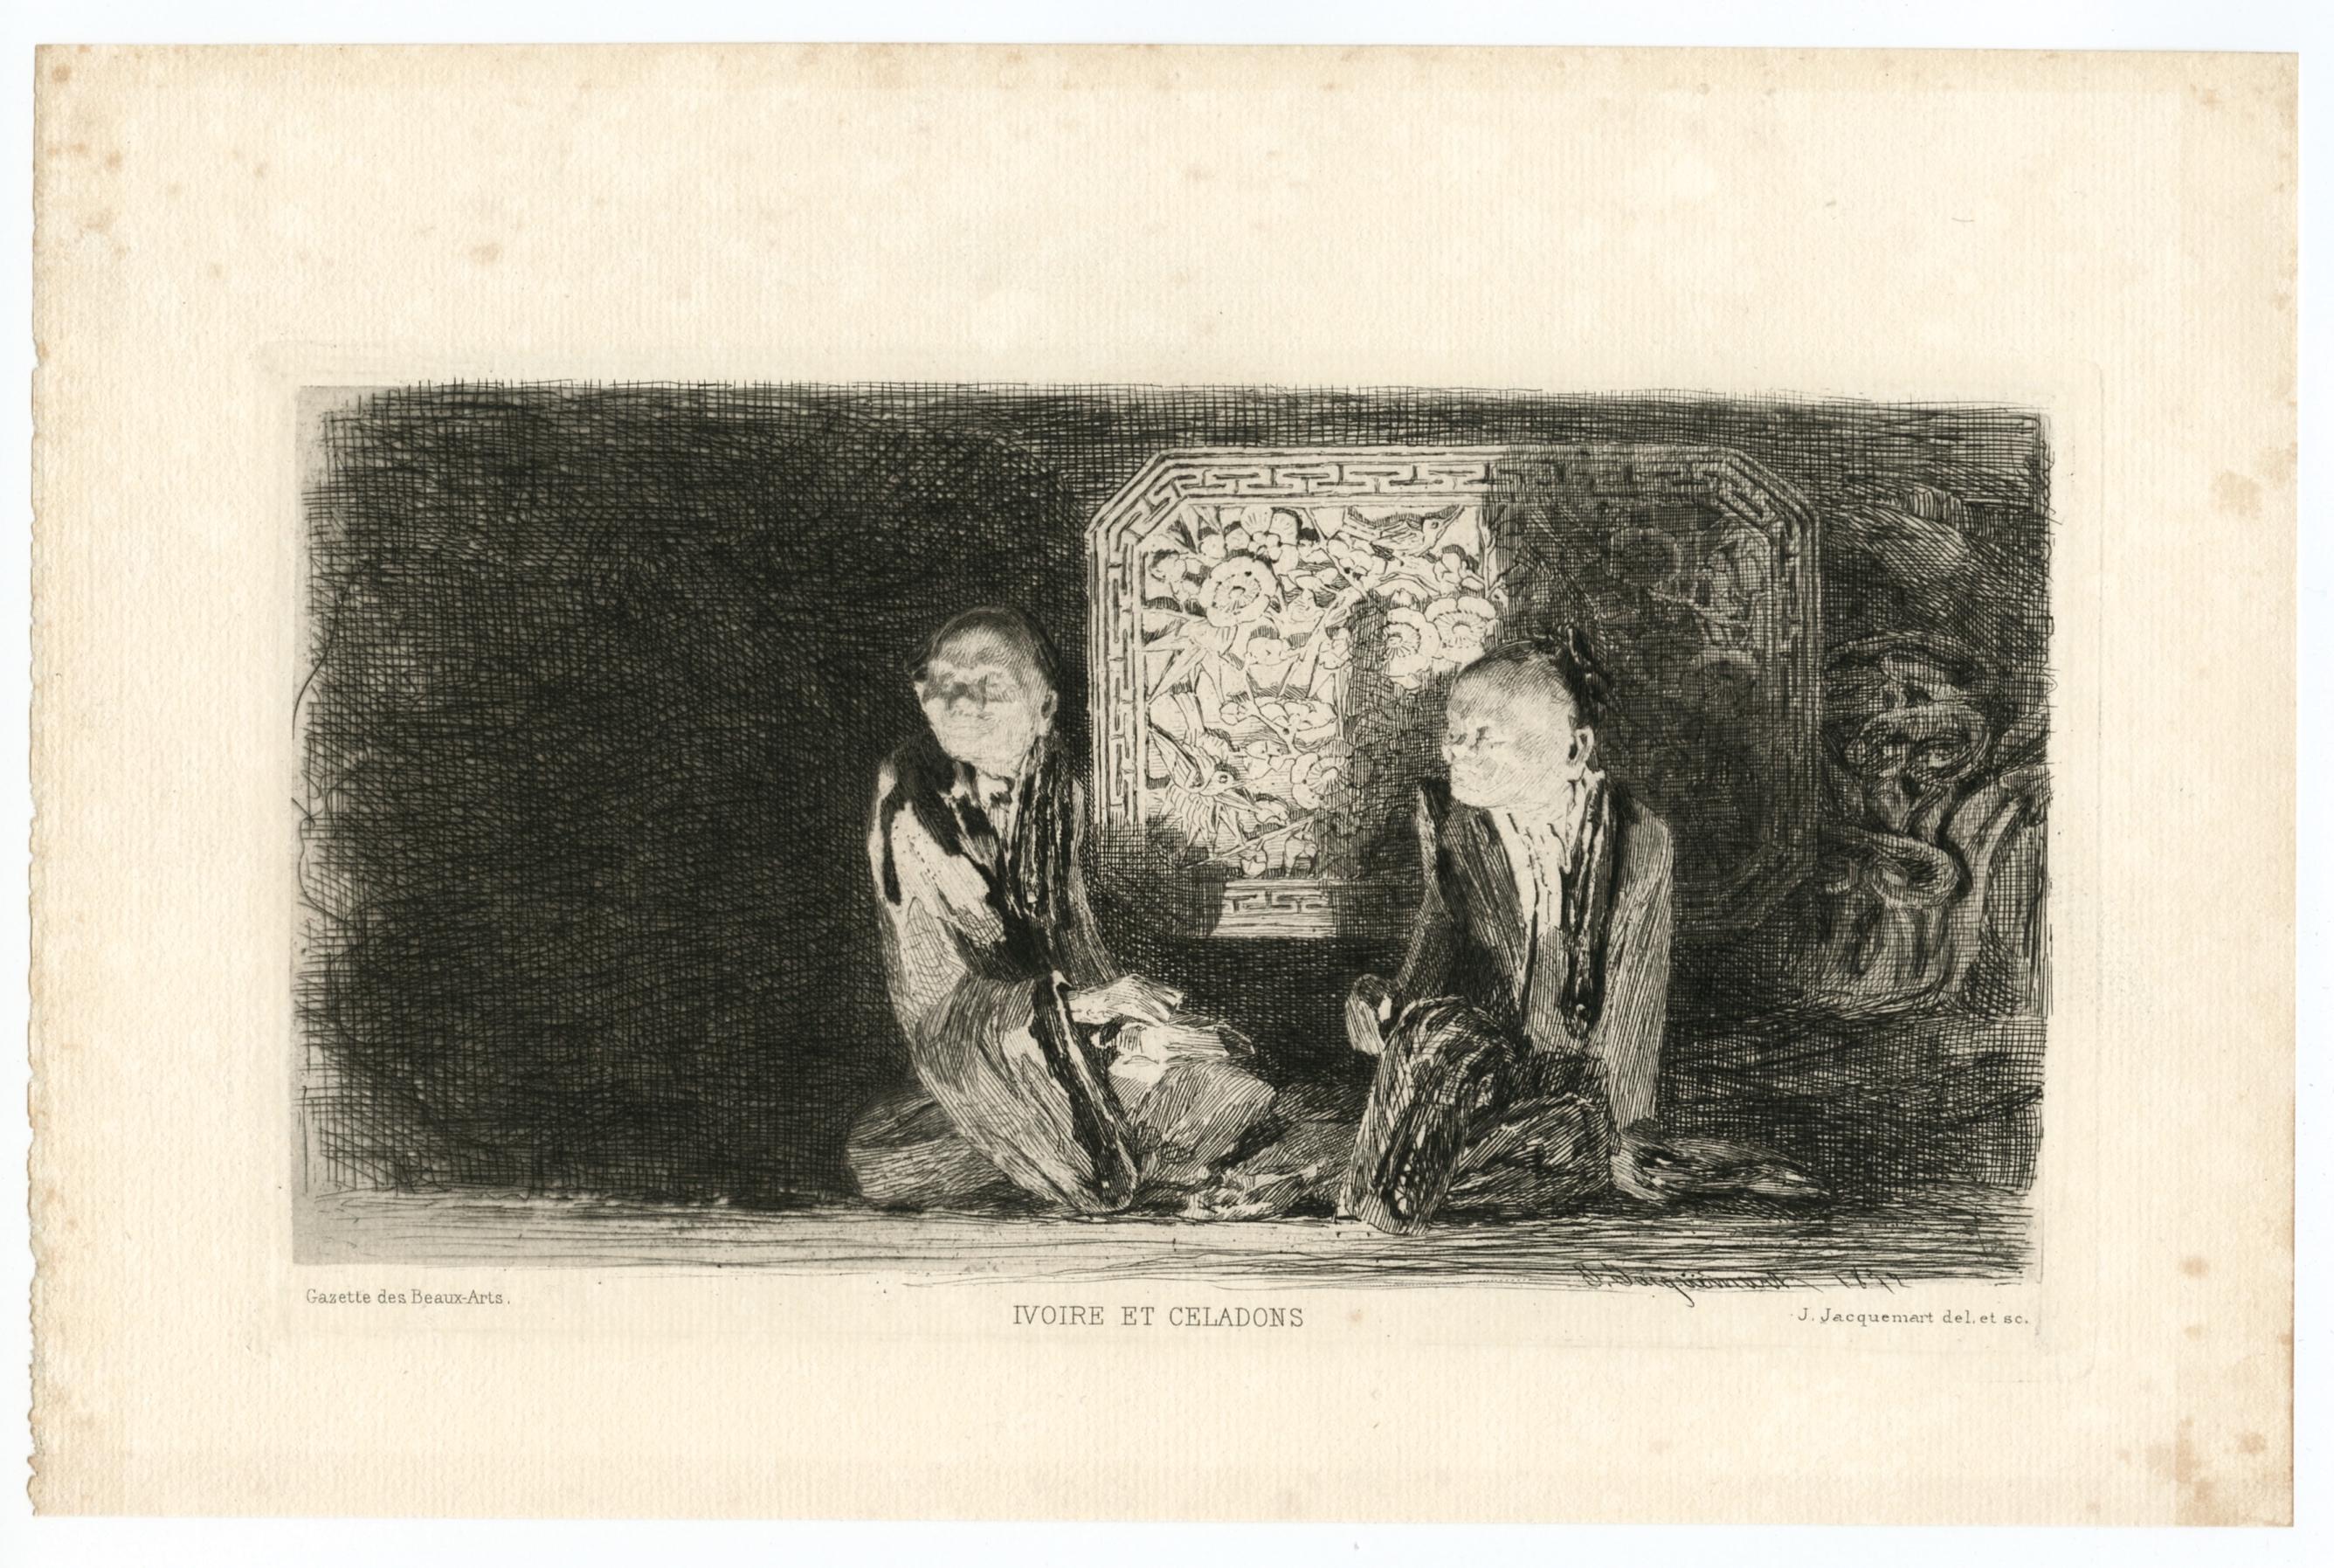 Medium: original etching. This impression on cream laid paper was published by the Gazette des Beaux-Arts in 1903. Plate size: 4 3/4 x 8 3/4 inches (125 x 220 mm). Signed in the plate, not hand-signed. 

Condition: there is foxing to the paper,